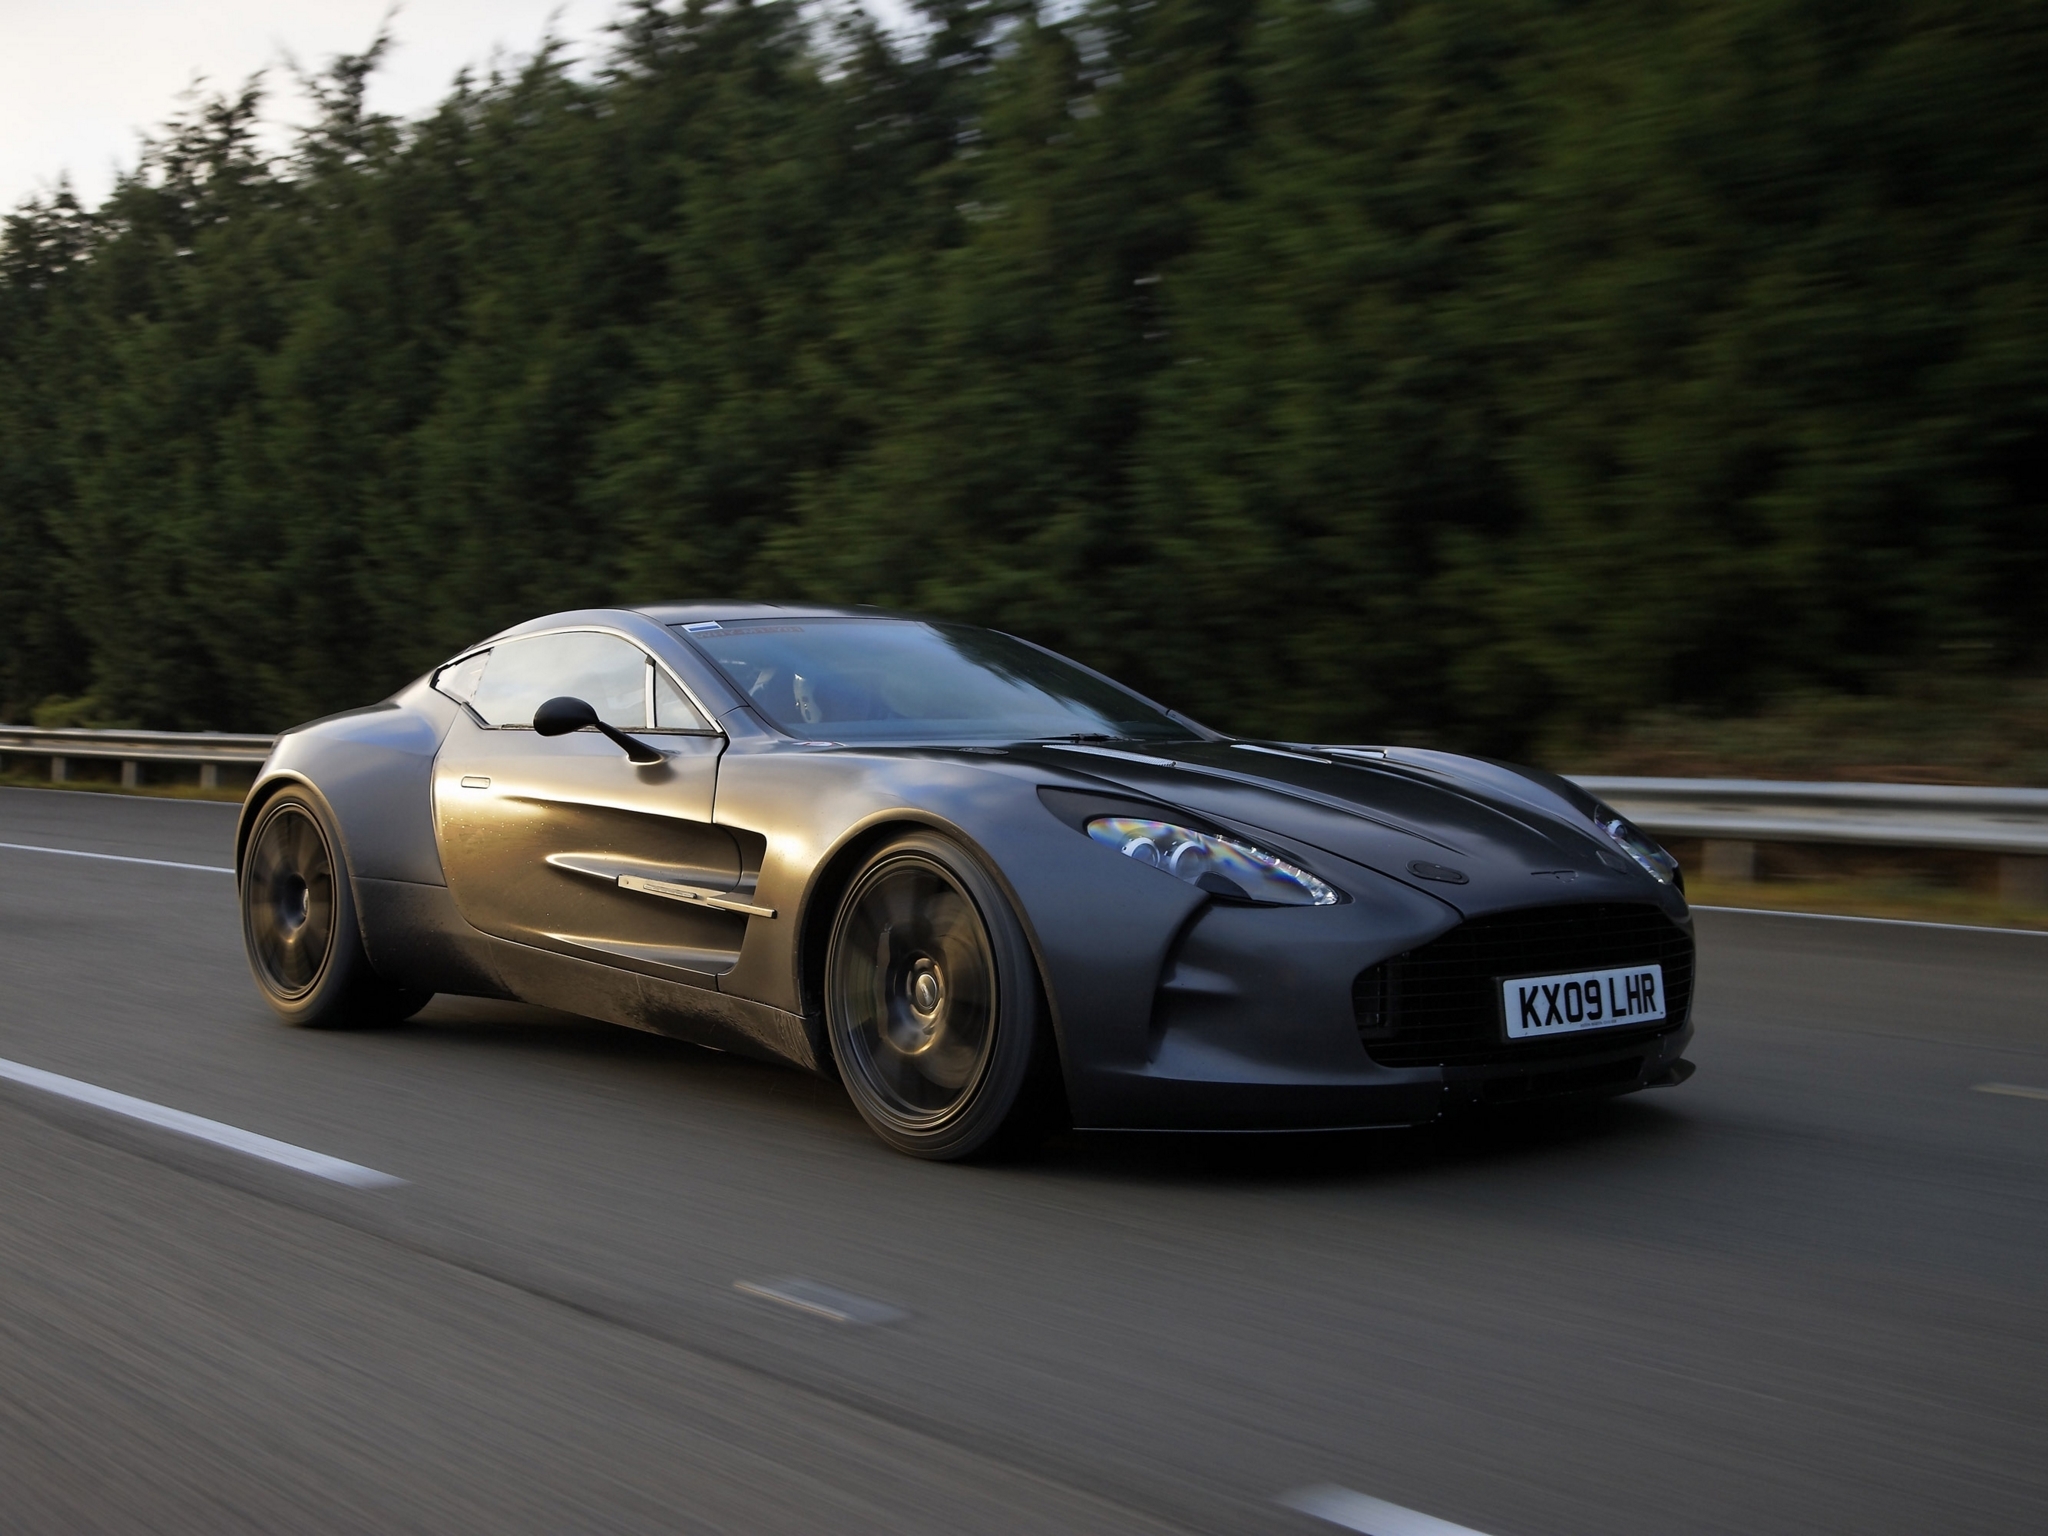 Aston Martin One-77 Wallpapers